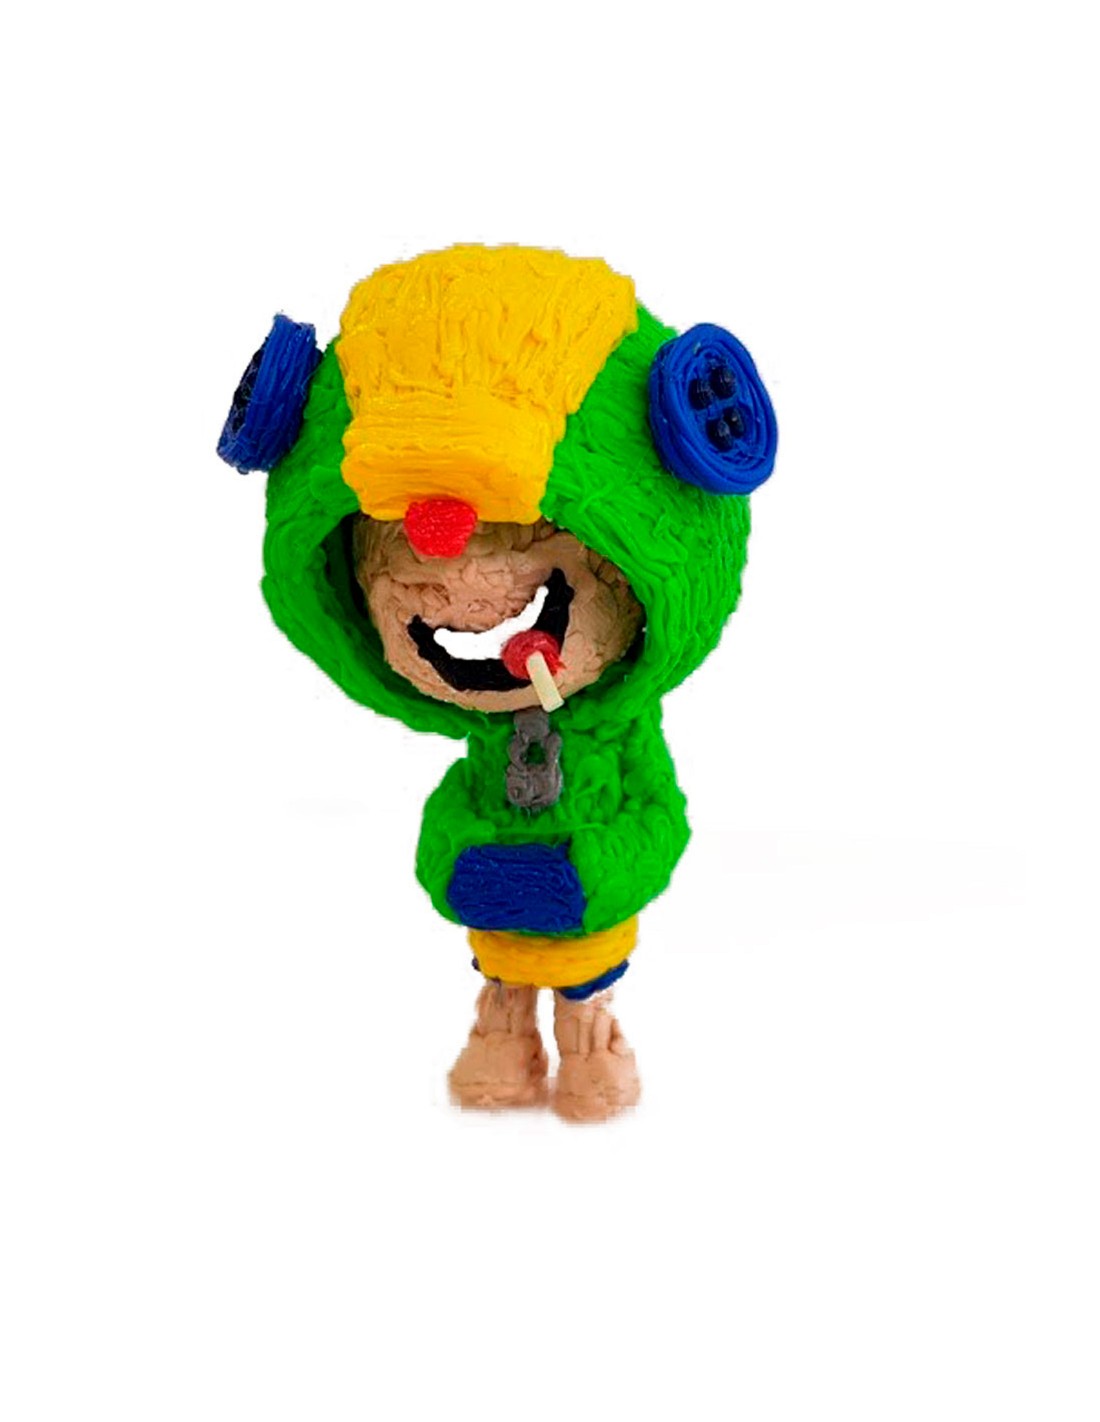 Leon From Brawl Stars Free Template For A 3d Pen - brawl stars why can i see leon